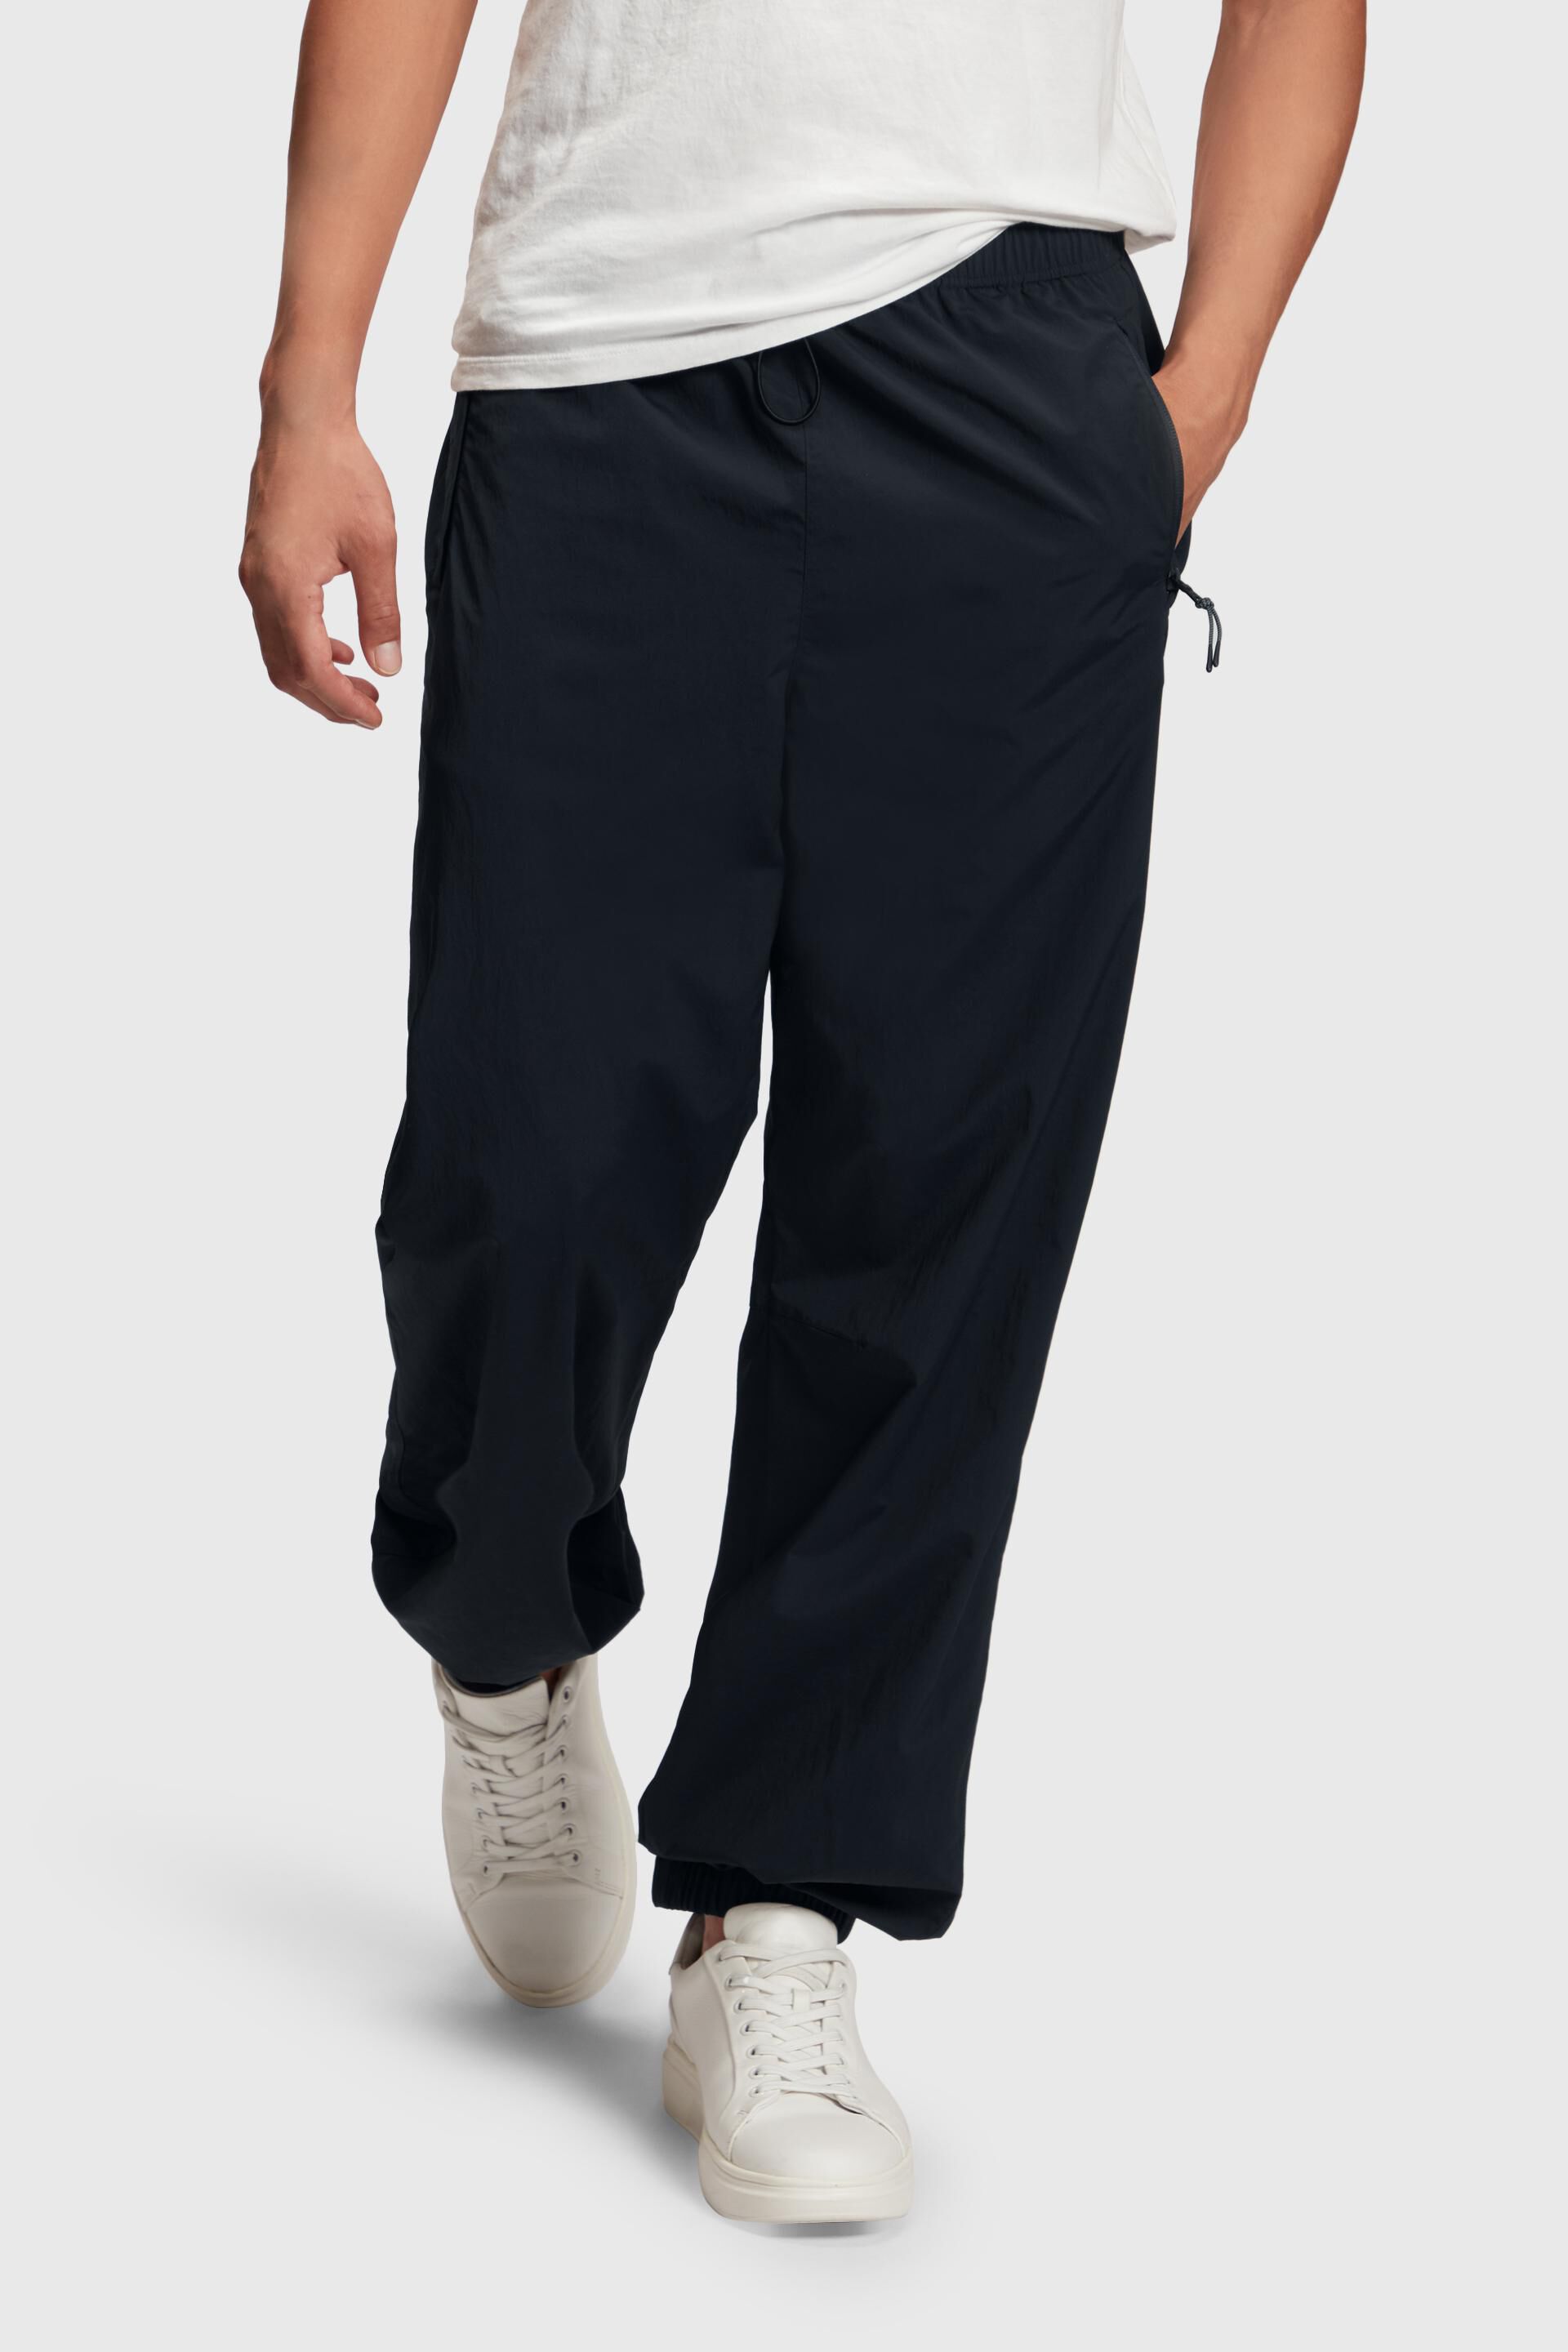 Esprit joggers fit Relaxed